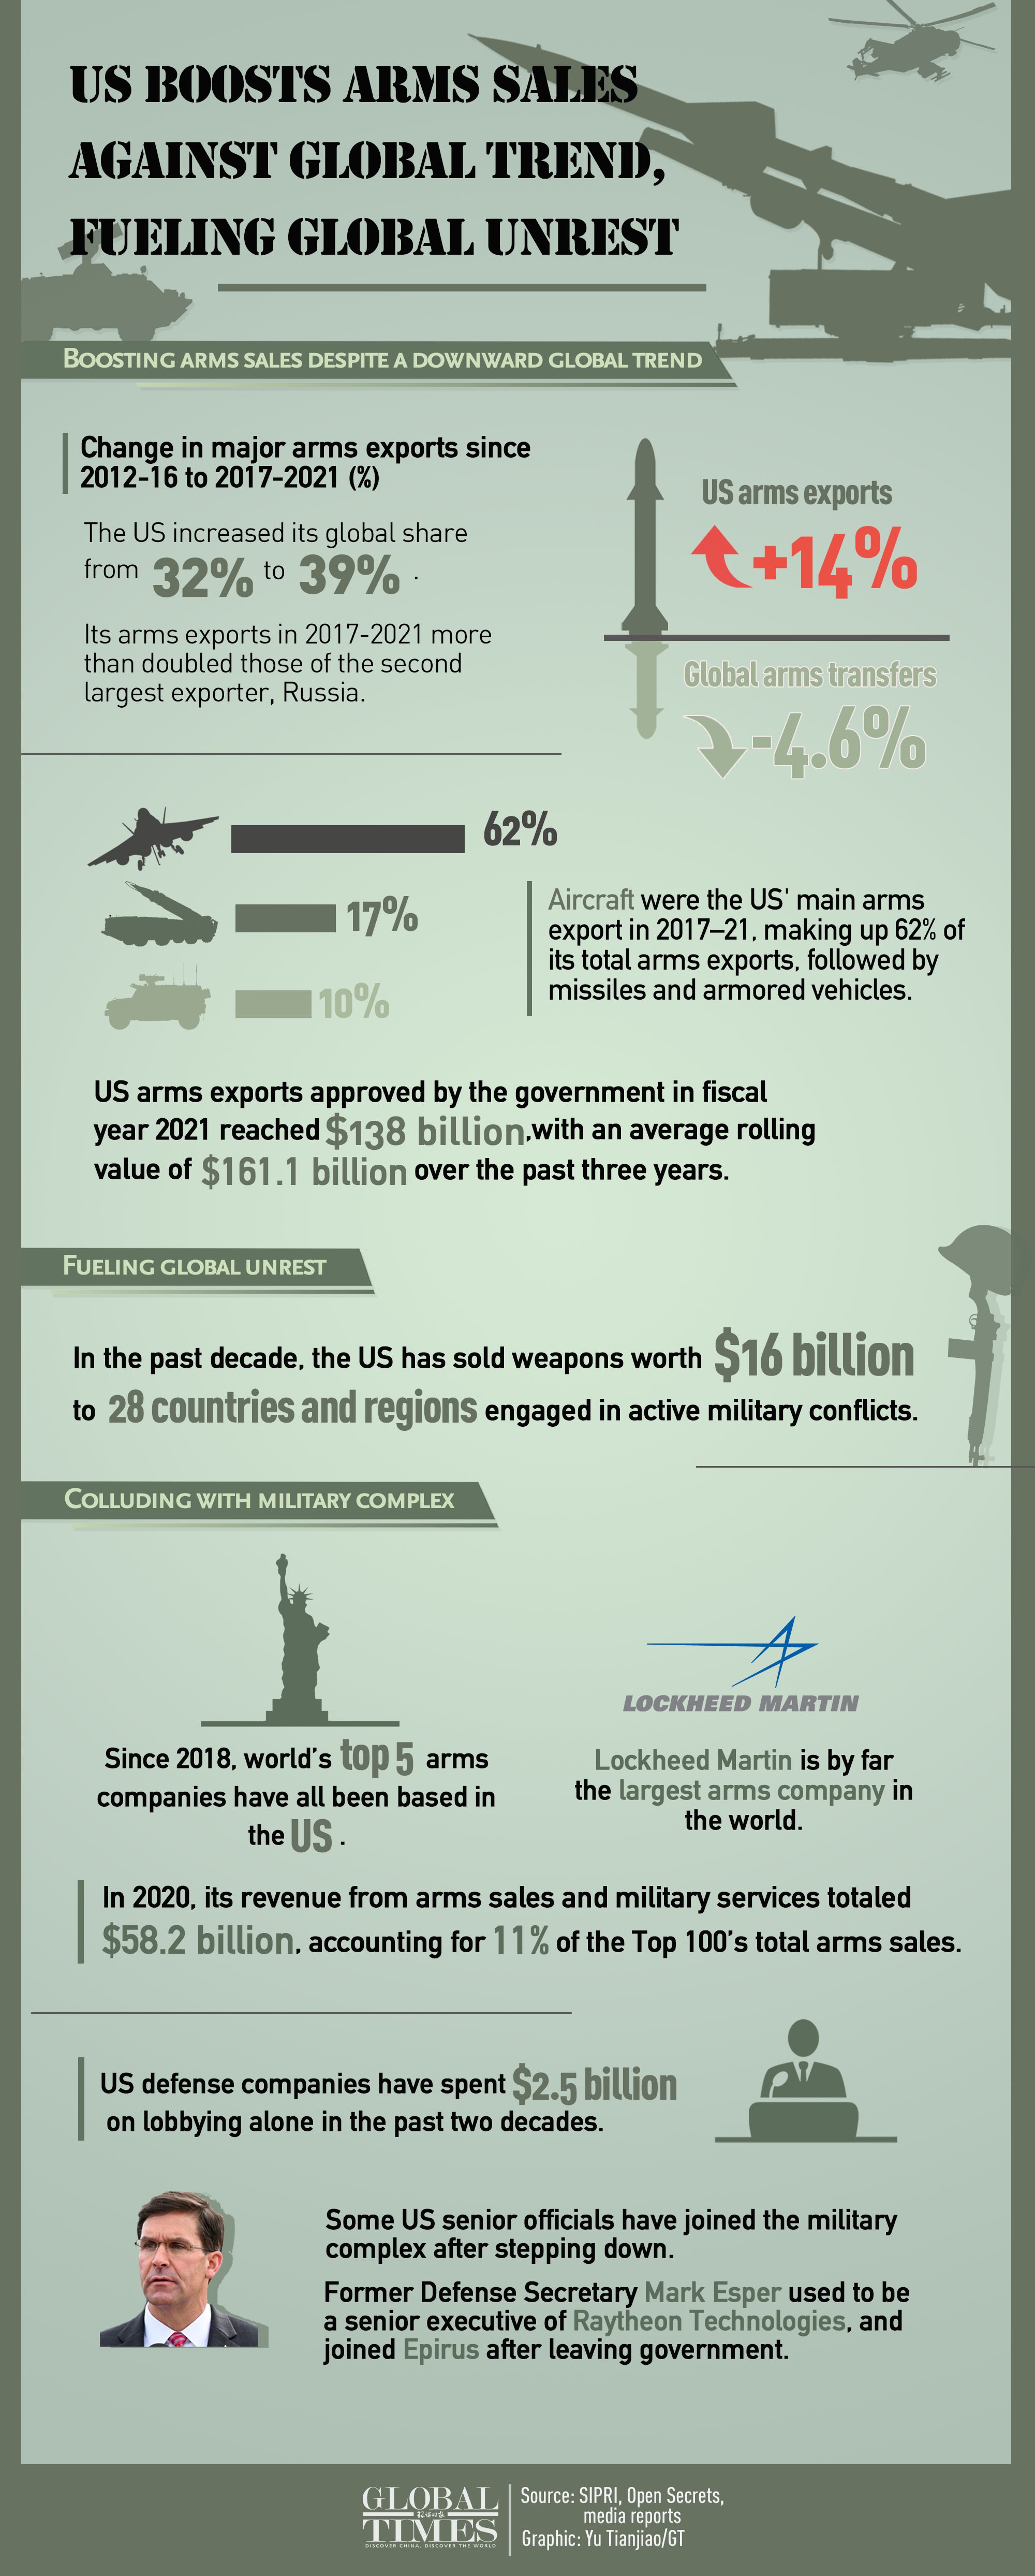 While global arms trade is in a downward trend, what has the US been doing? - Greatly increasing its arms exports in the past 5 years- Selling weapons around to fuel global unrest- US arms firms and politicians taking advantage of wars to become rich.